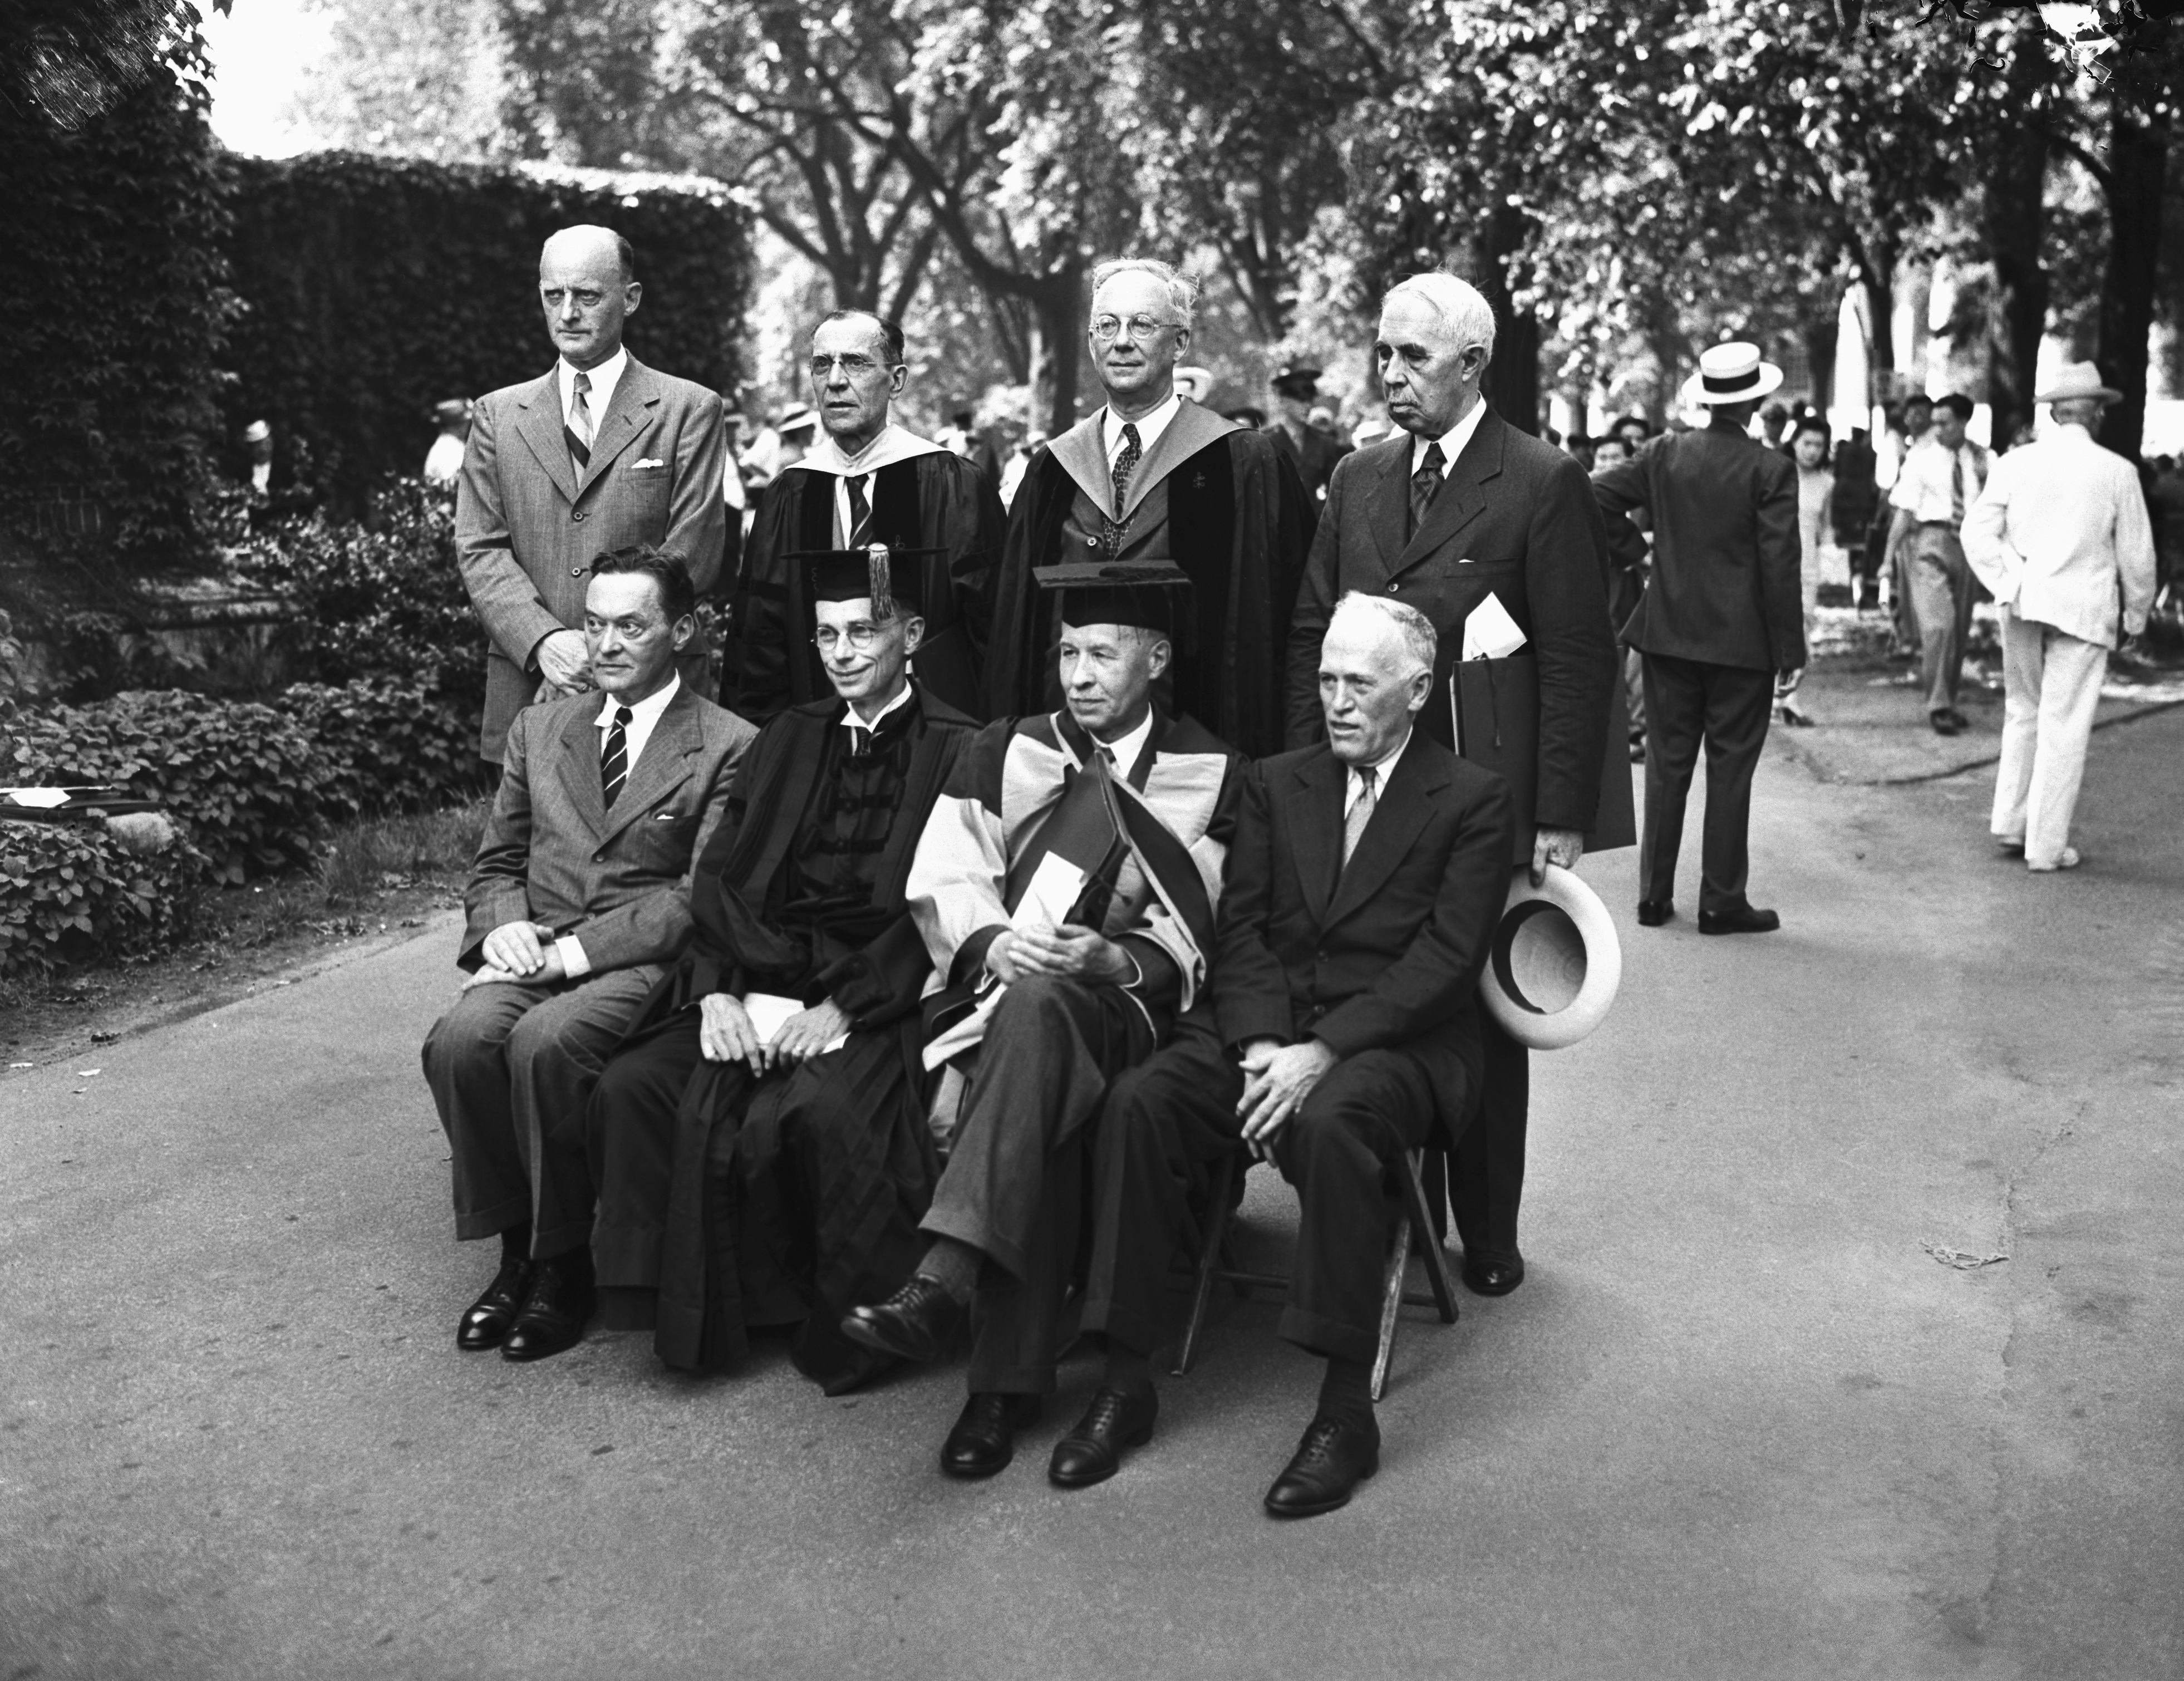 A Harvard alum, Walter Lippmann (front row, far left) received an honorary Doctor of Letters degree from the school in 1944. Lippmann played an integral role in establishing Harvard’s Nieman Foundation